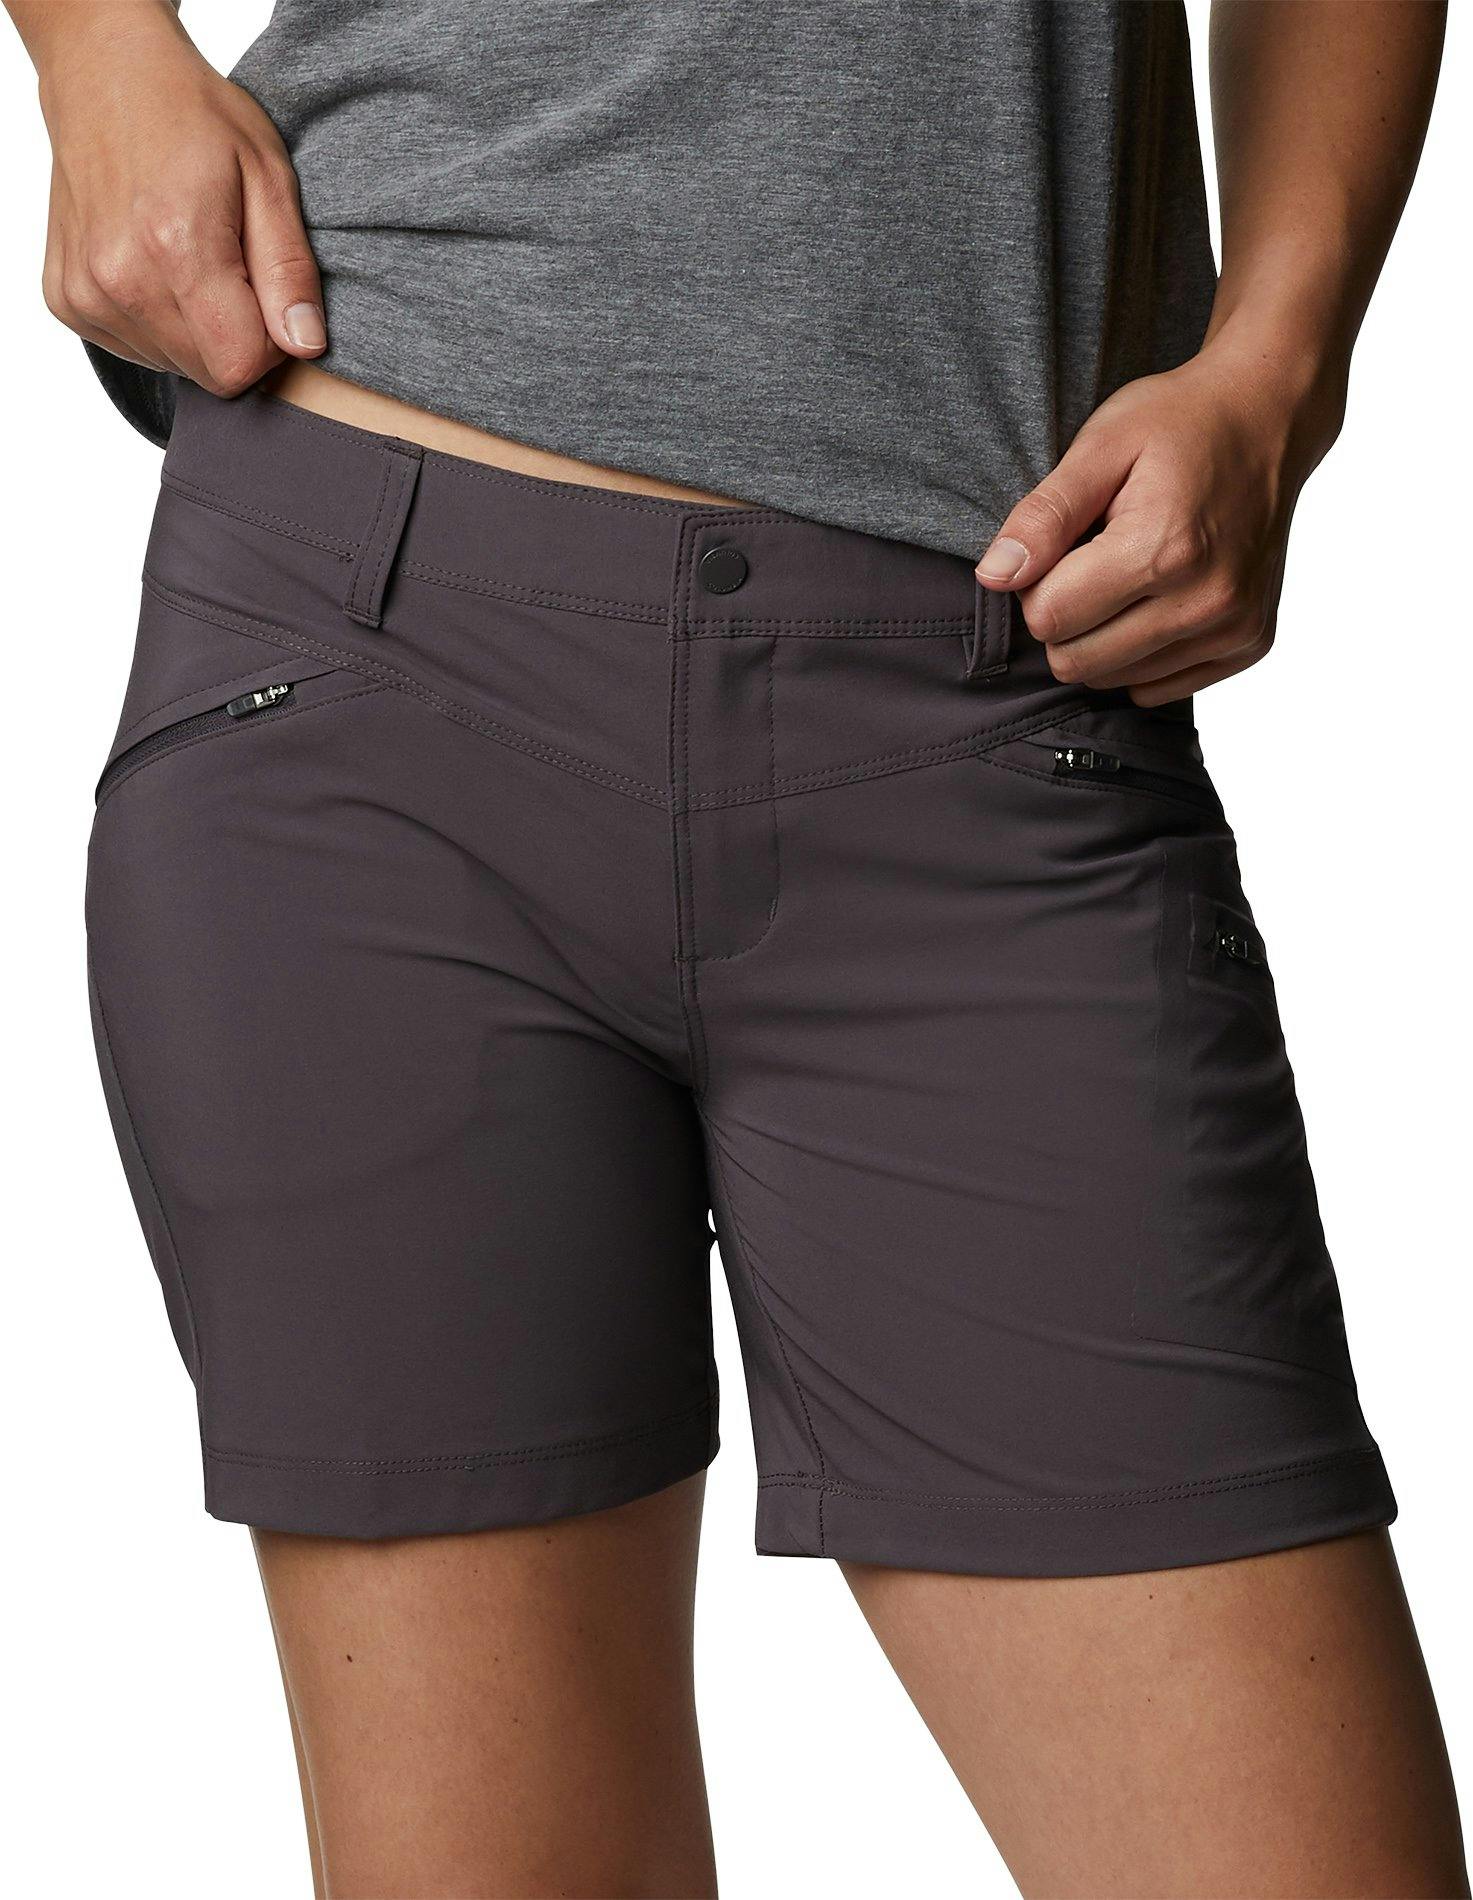 Product image for Peak to Point Shorts - Women's